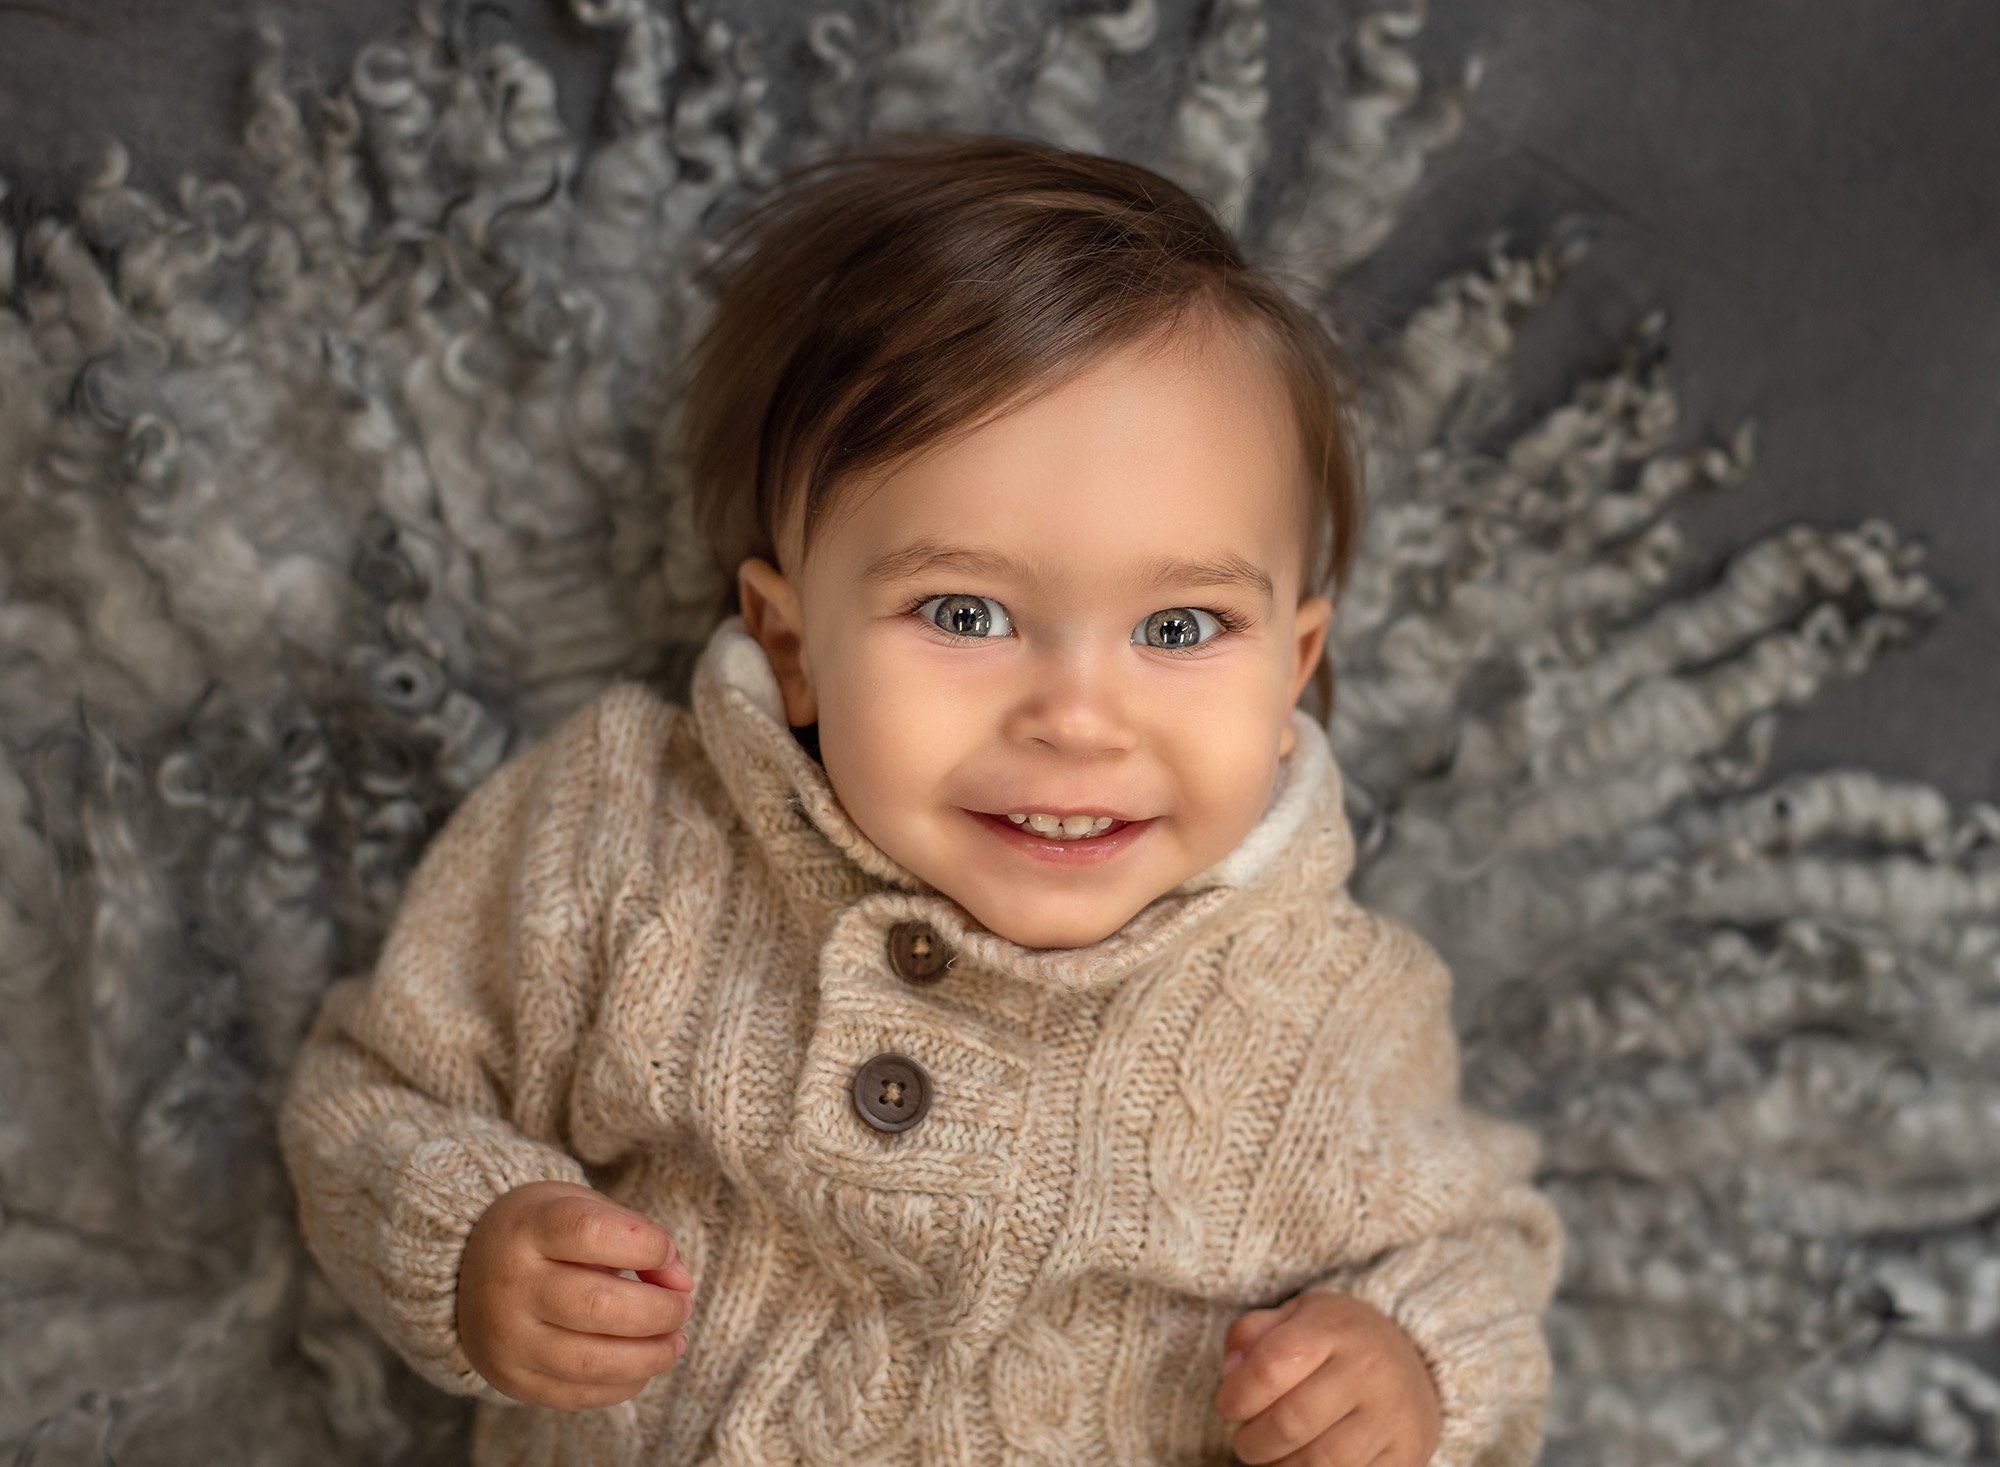 Photoshoot for New Year’s Eve Baby | New Year's Eve Portraits